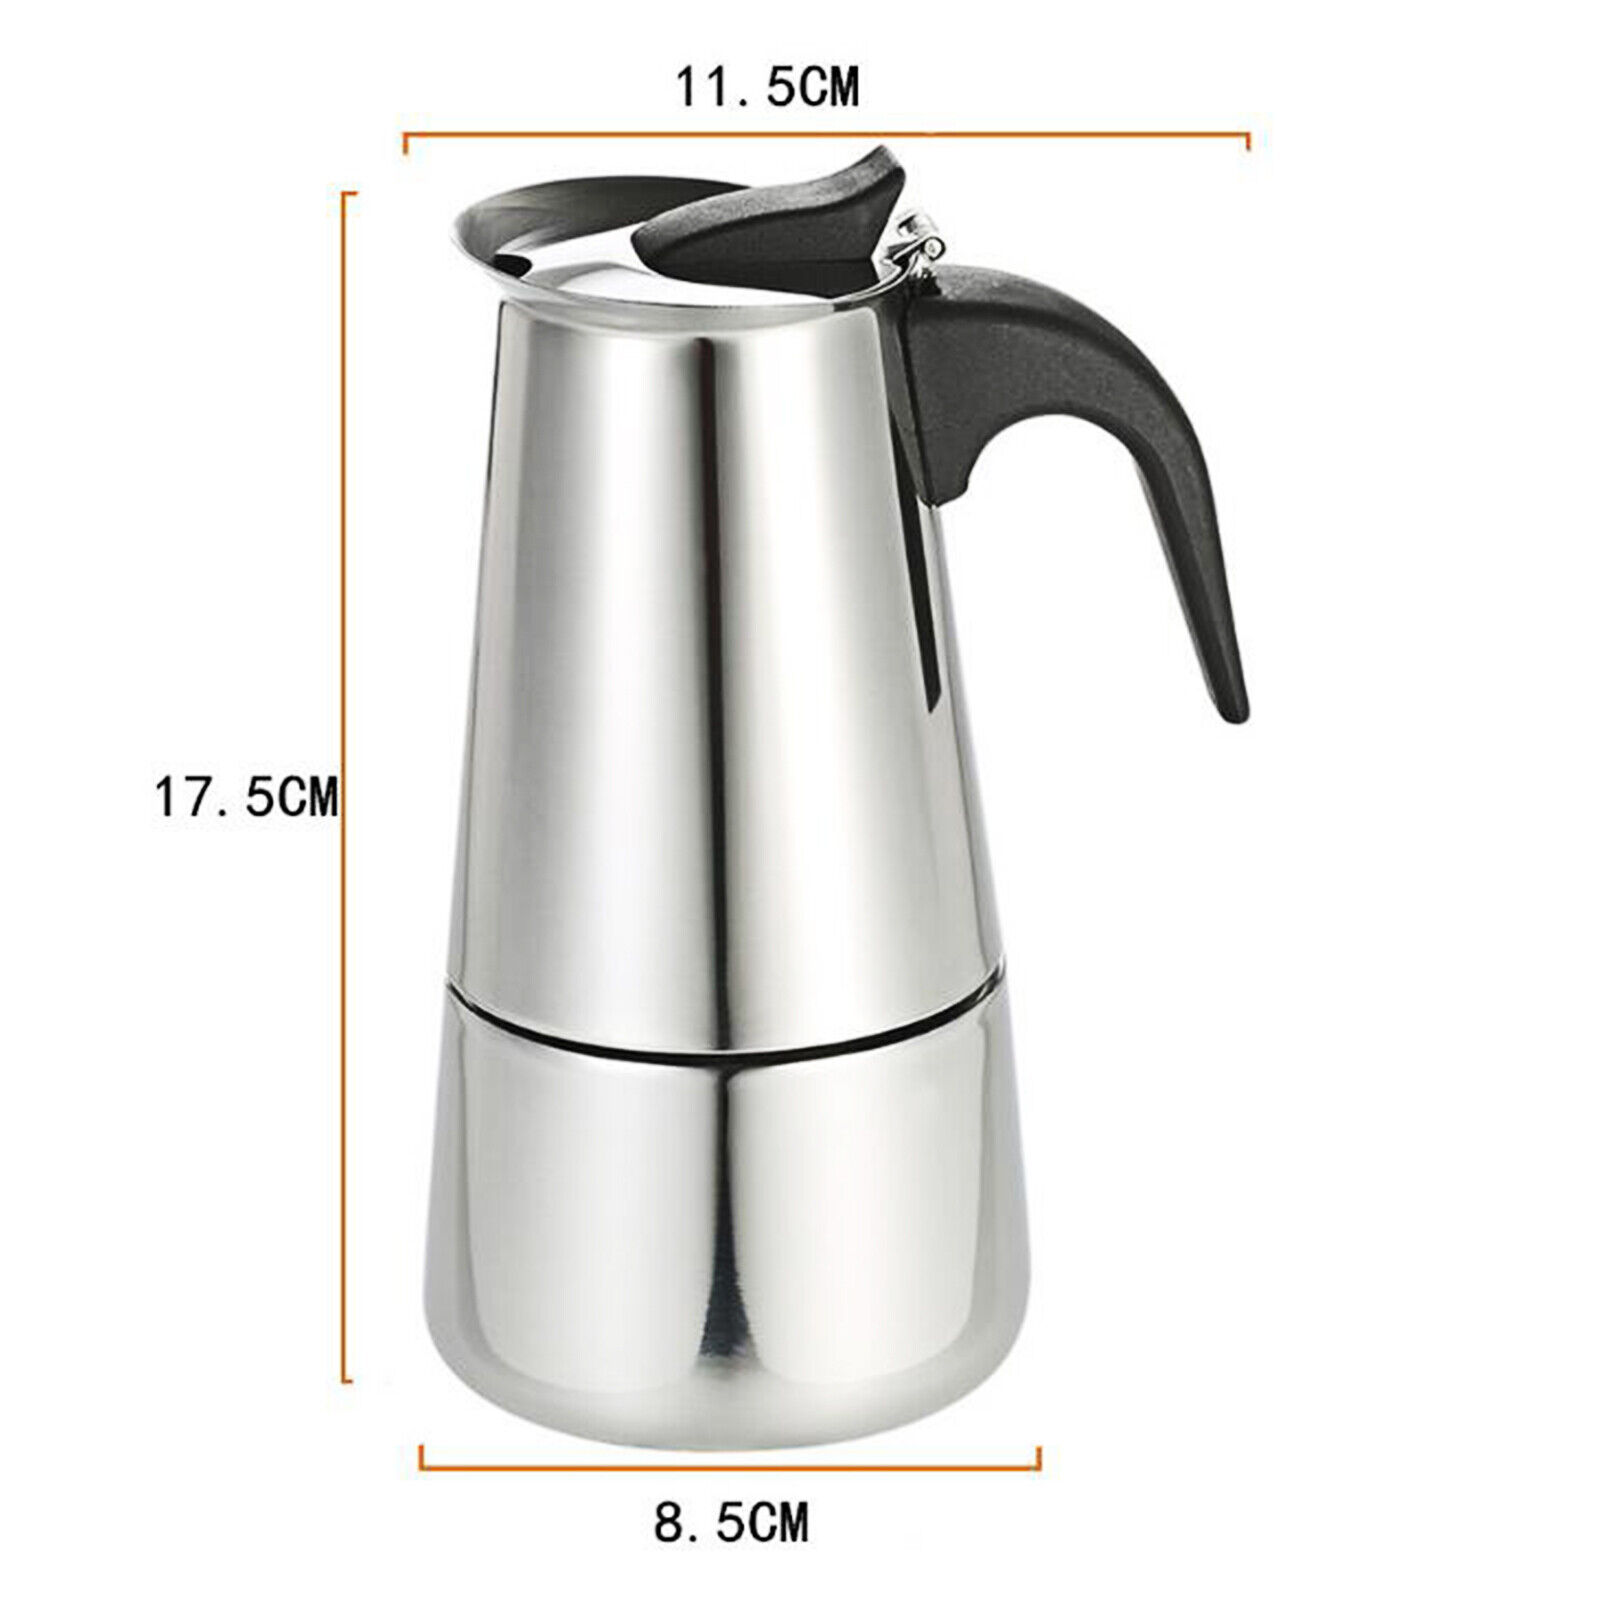 Coffee Espresso Maker Stovetop Moka Pot 4/6/9 Cup Stainless Steel Coffee Maker 